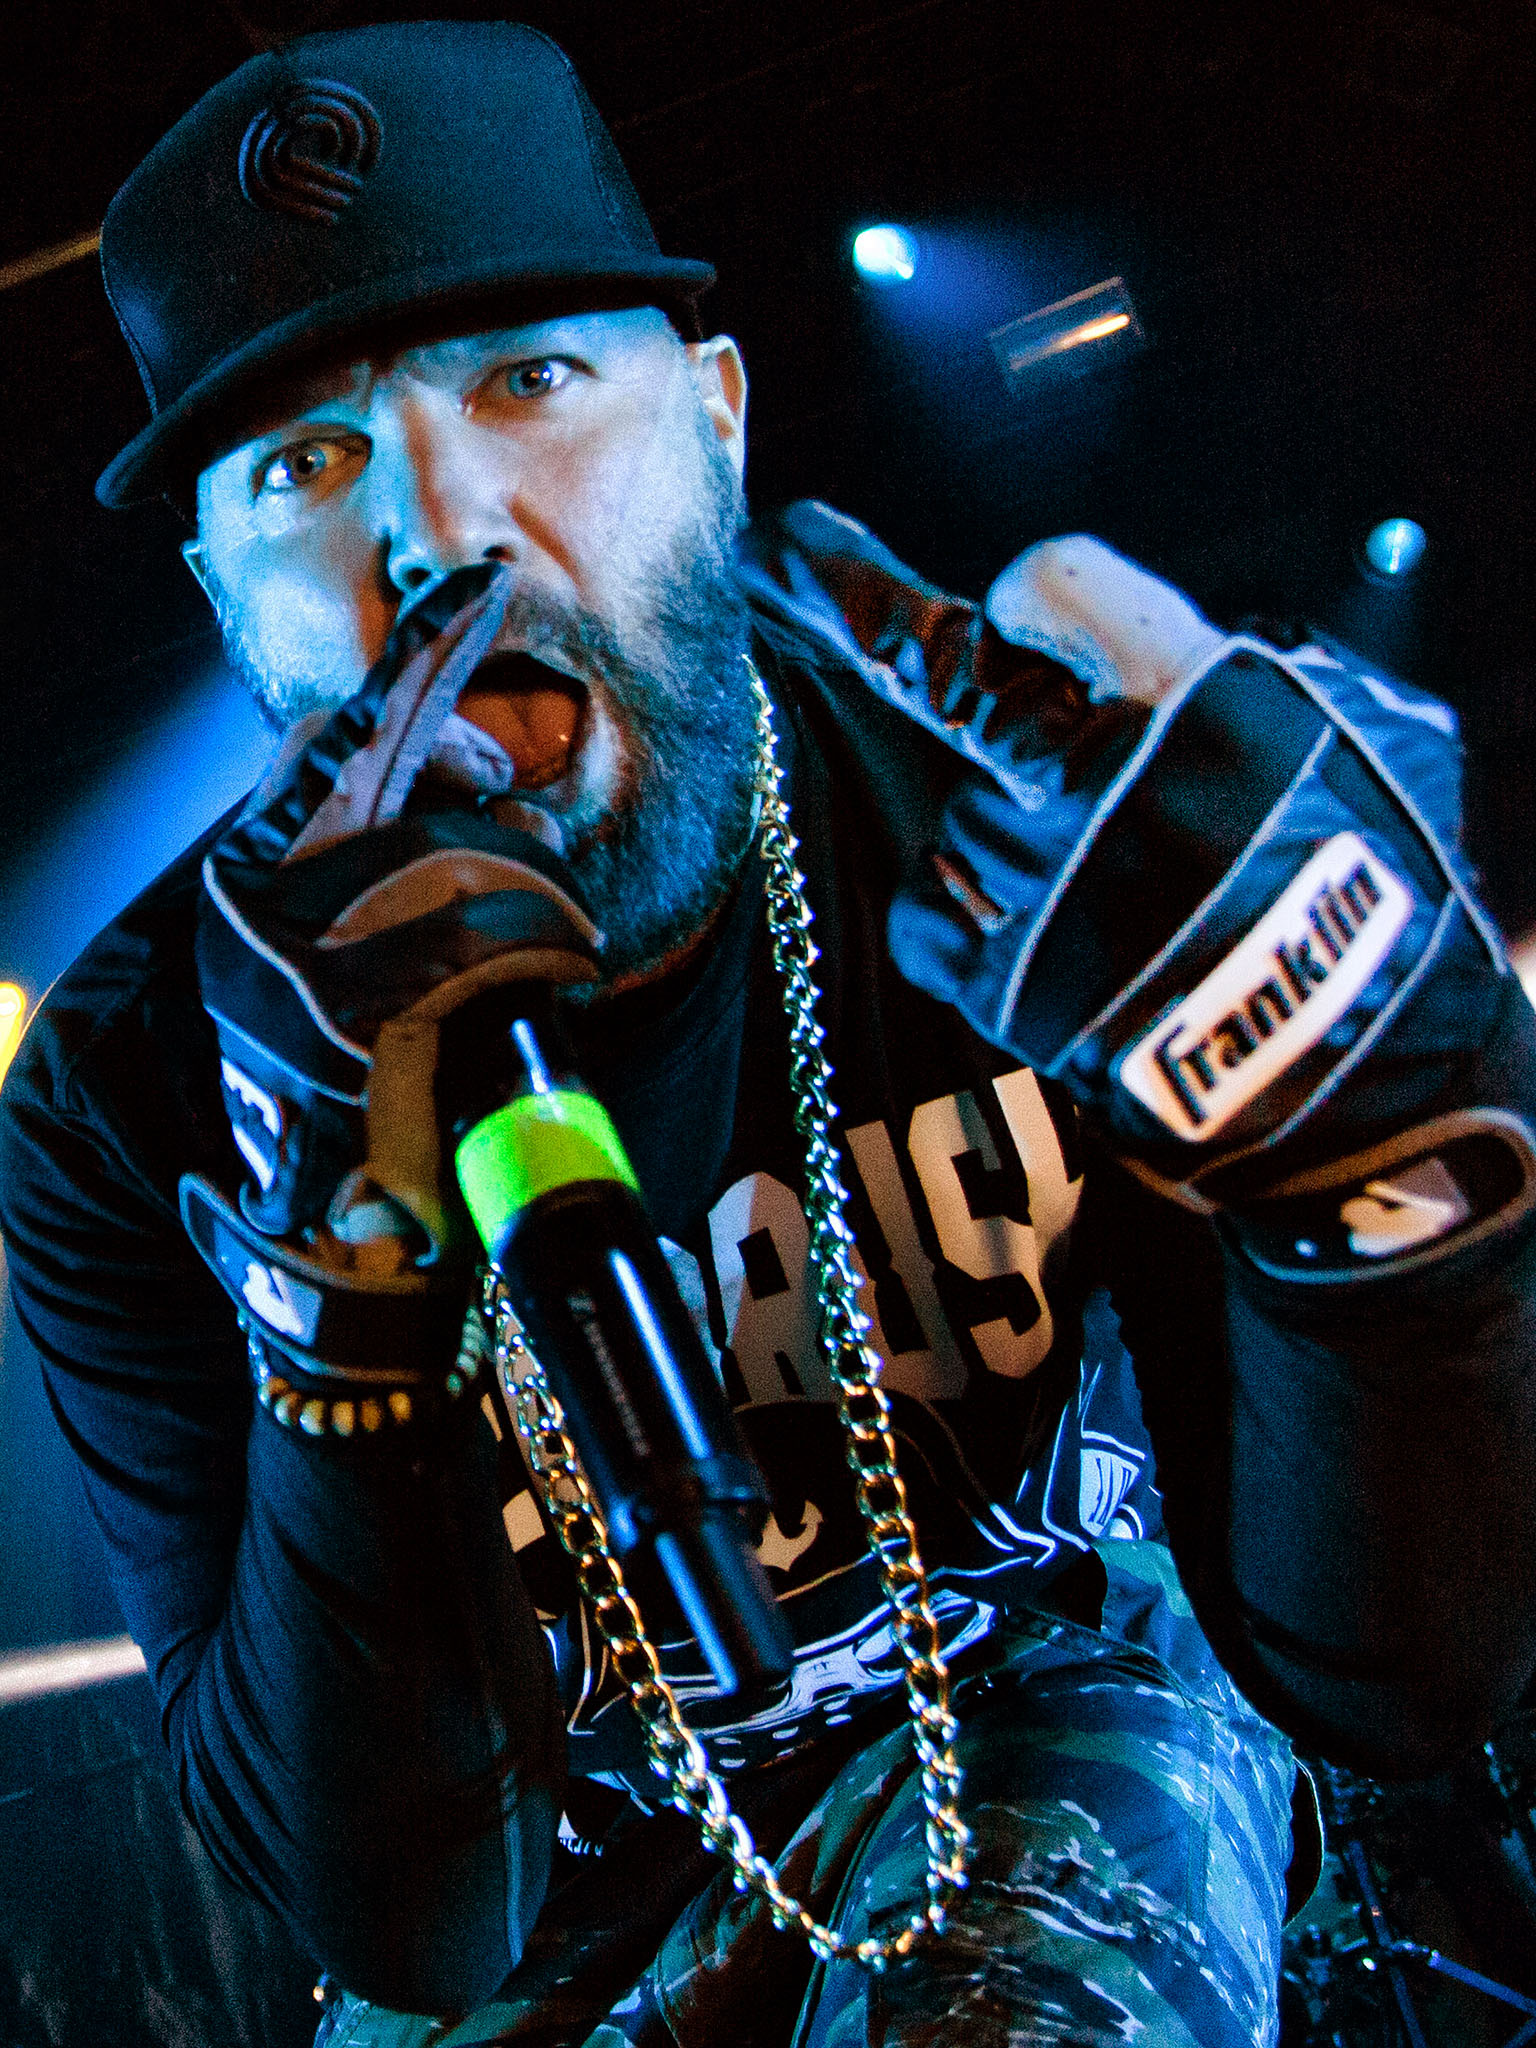 Fred Durst Limp Bizkit by Bullet-ray Photography